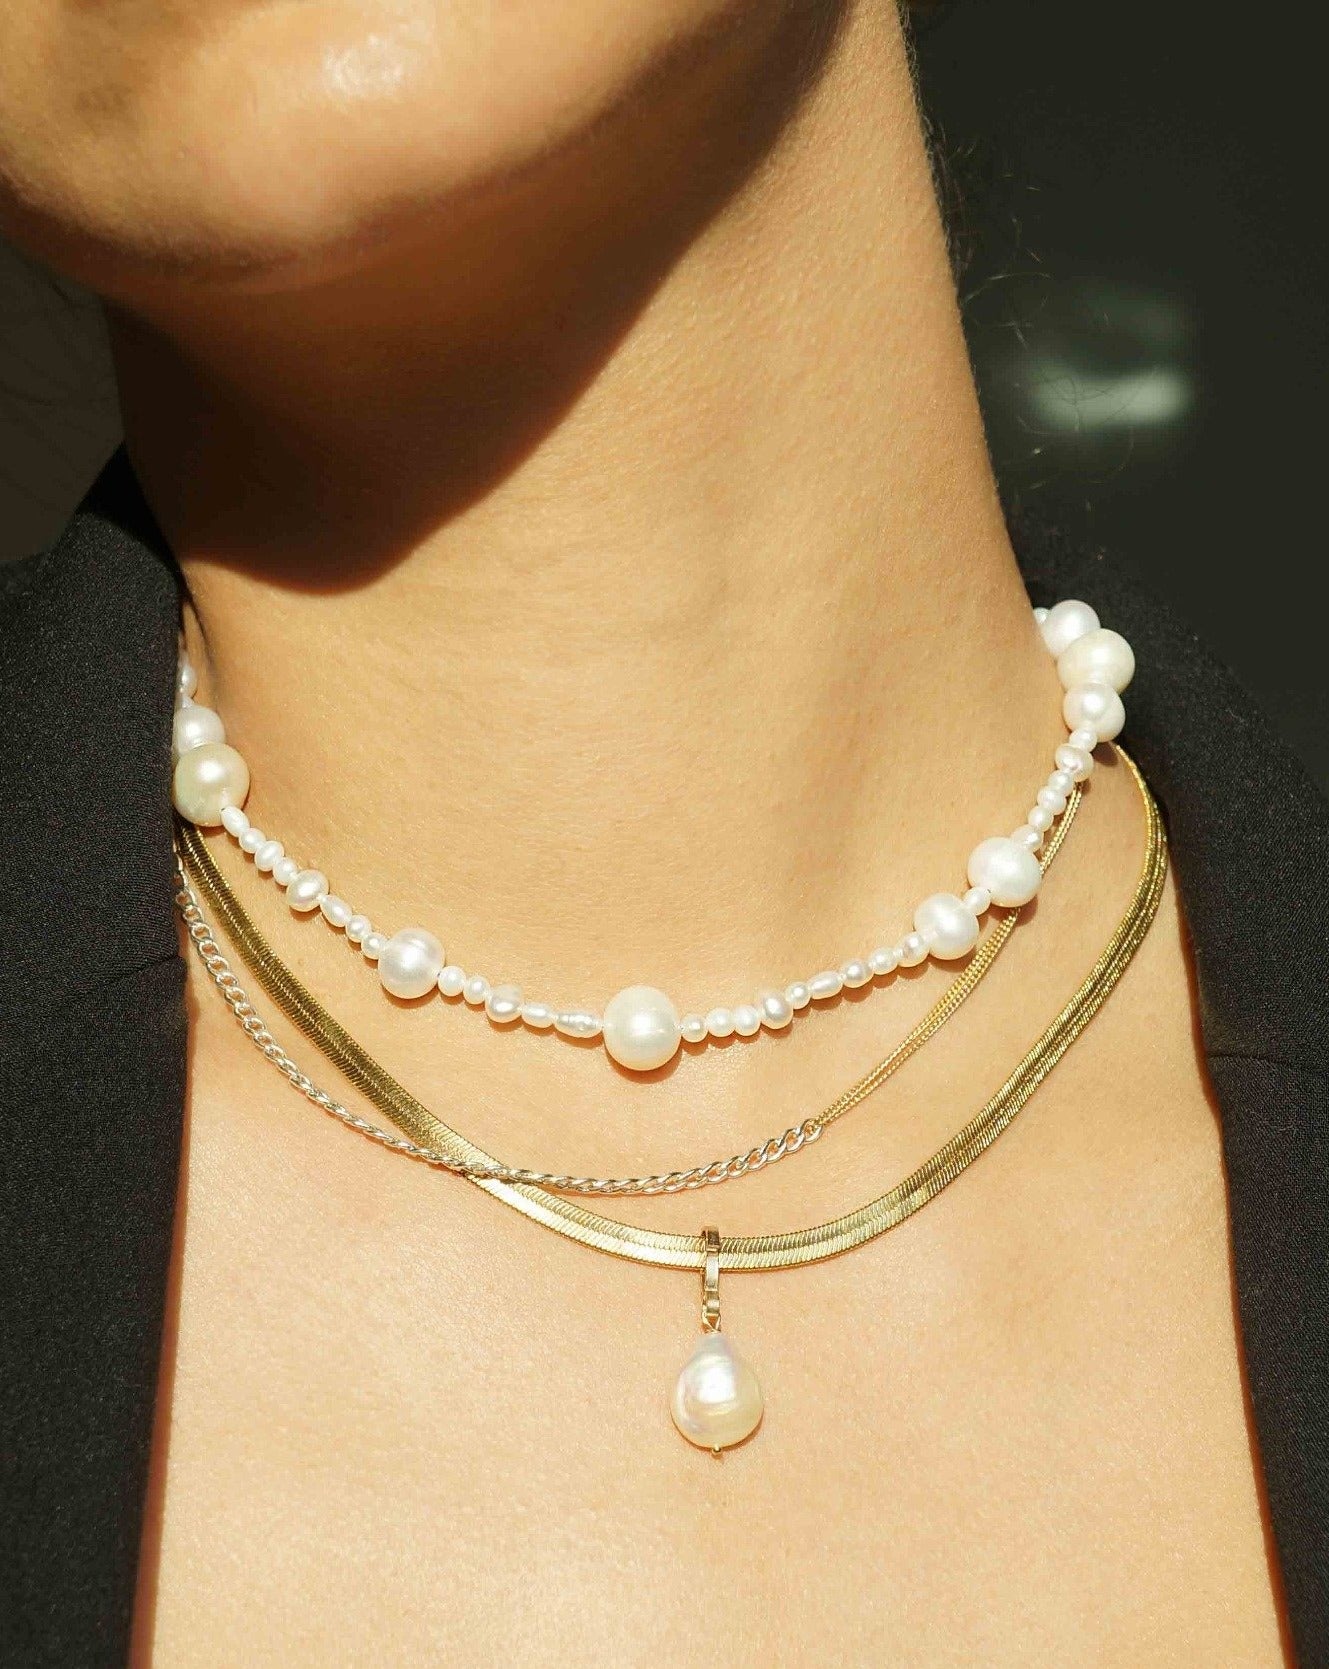 Madelyn Necklace by KOZAKH. A 14 to 16 inch adjustable length necklace with a strand of Freshwater Pearls, with a 14K Gold Filled clasp.